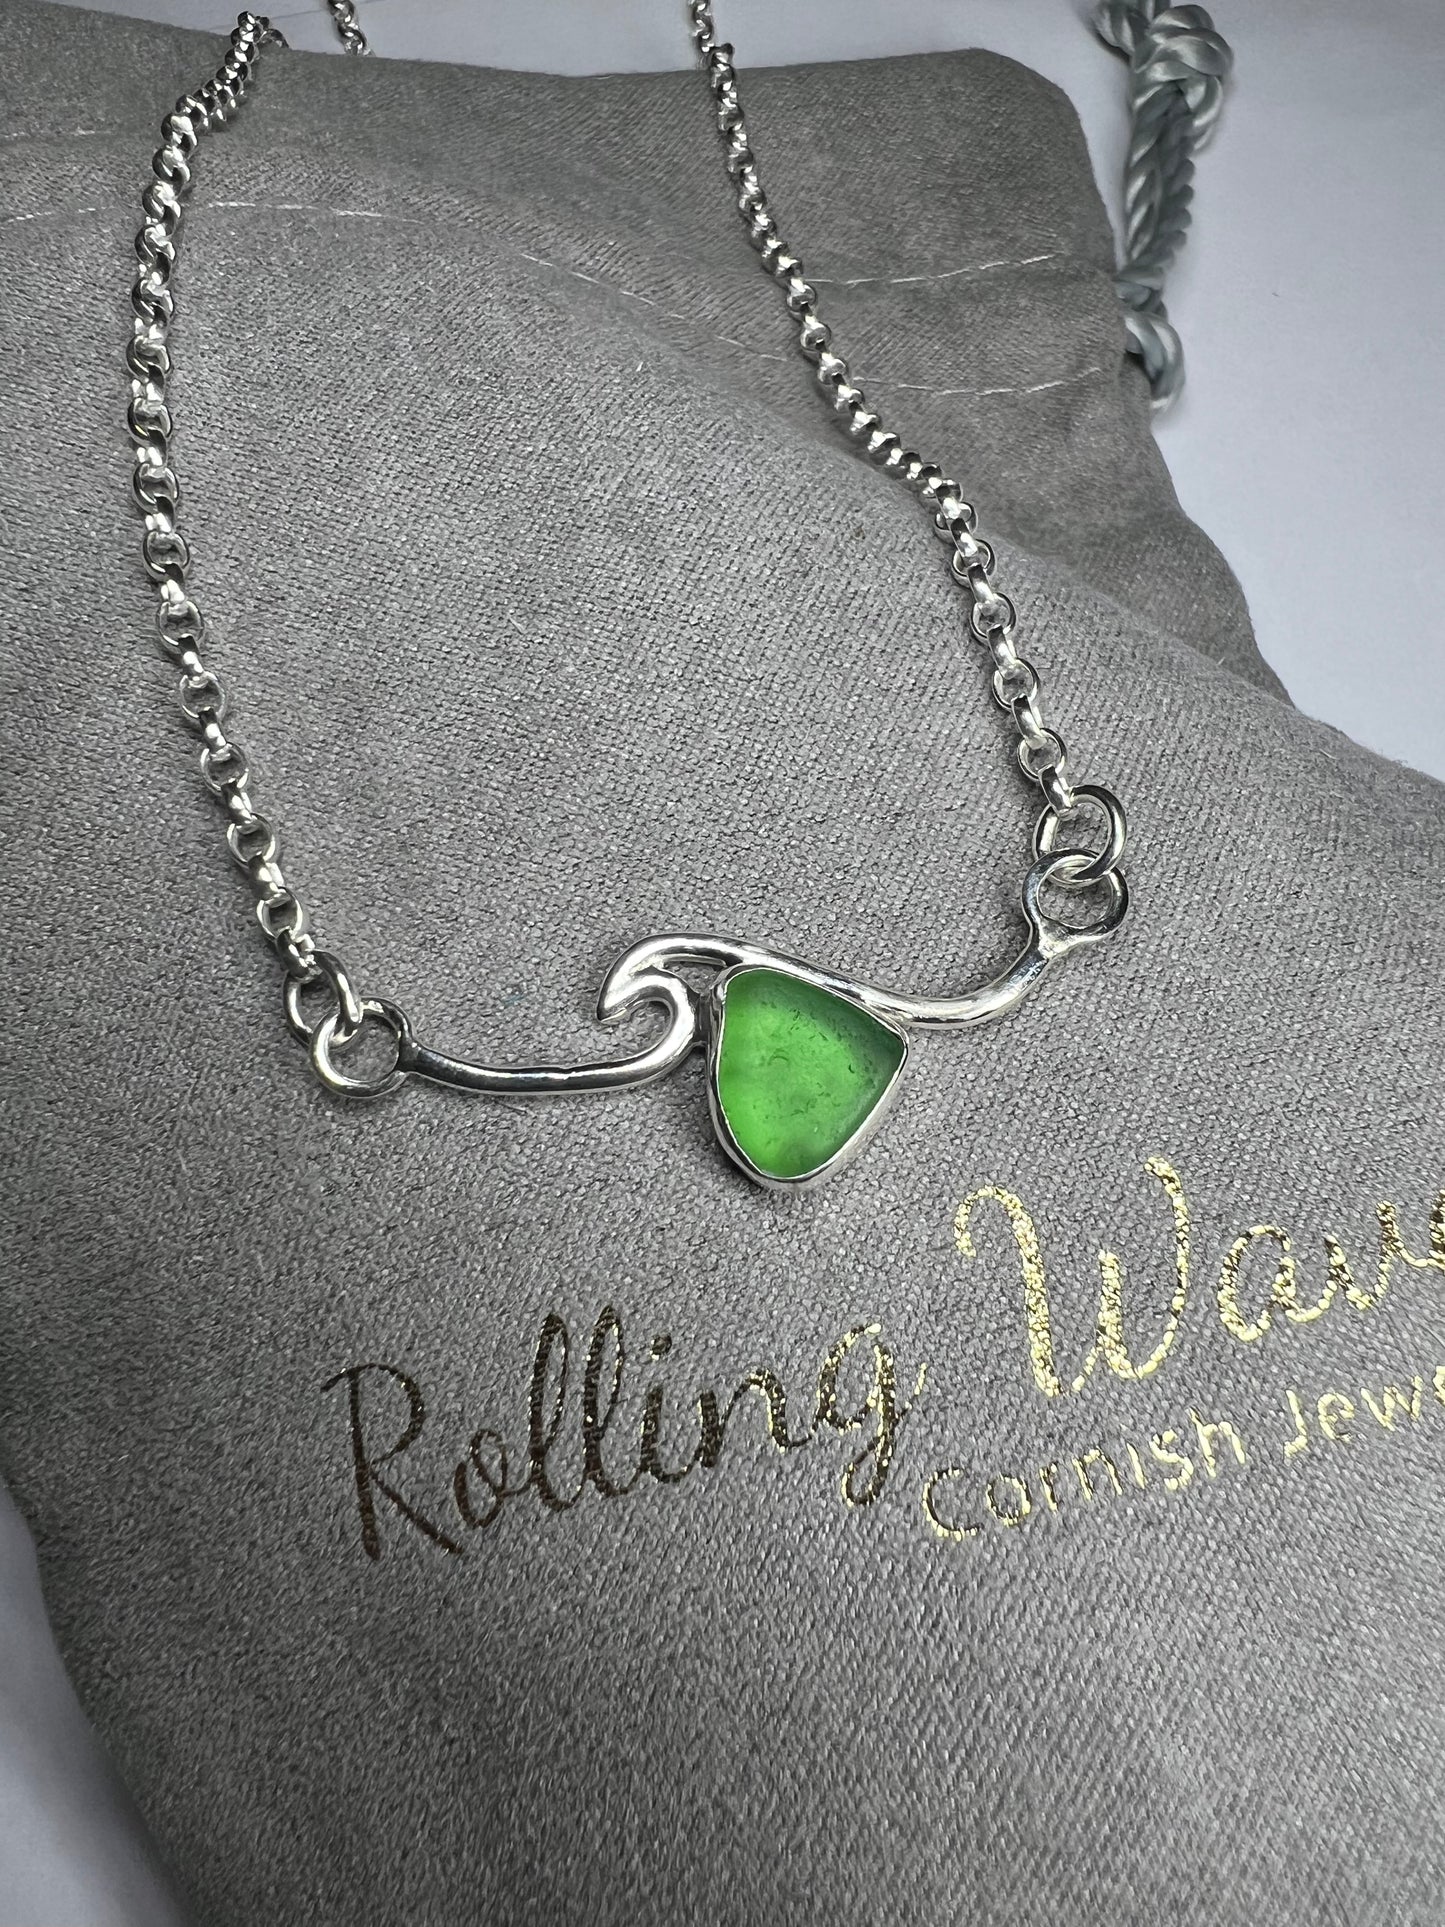 Cornish green seaglass rolling wave necklace